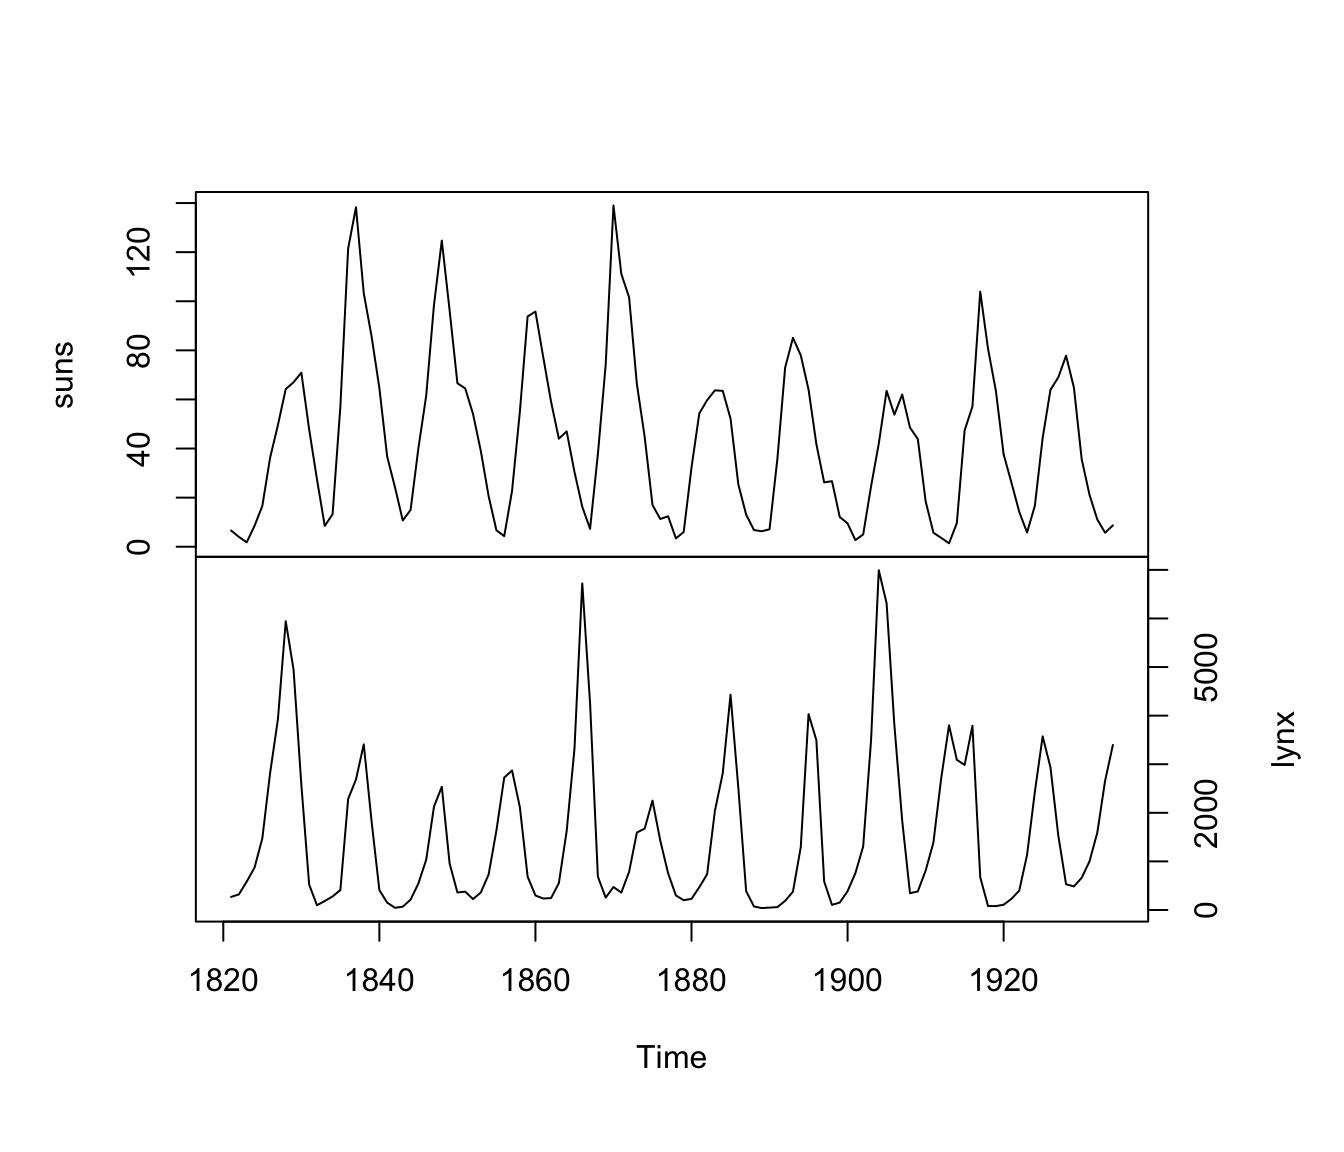 Time series of sunspot activity (top) and lynx trappings in Canada (bottom) from 1821-1934.